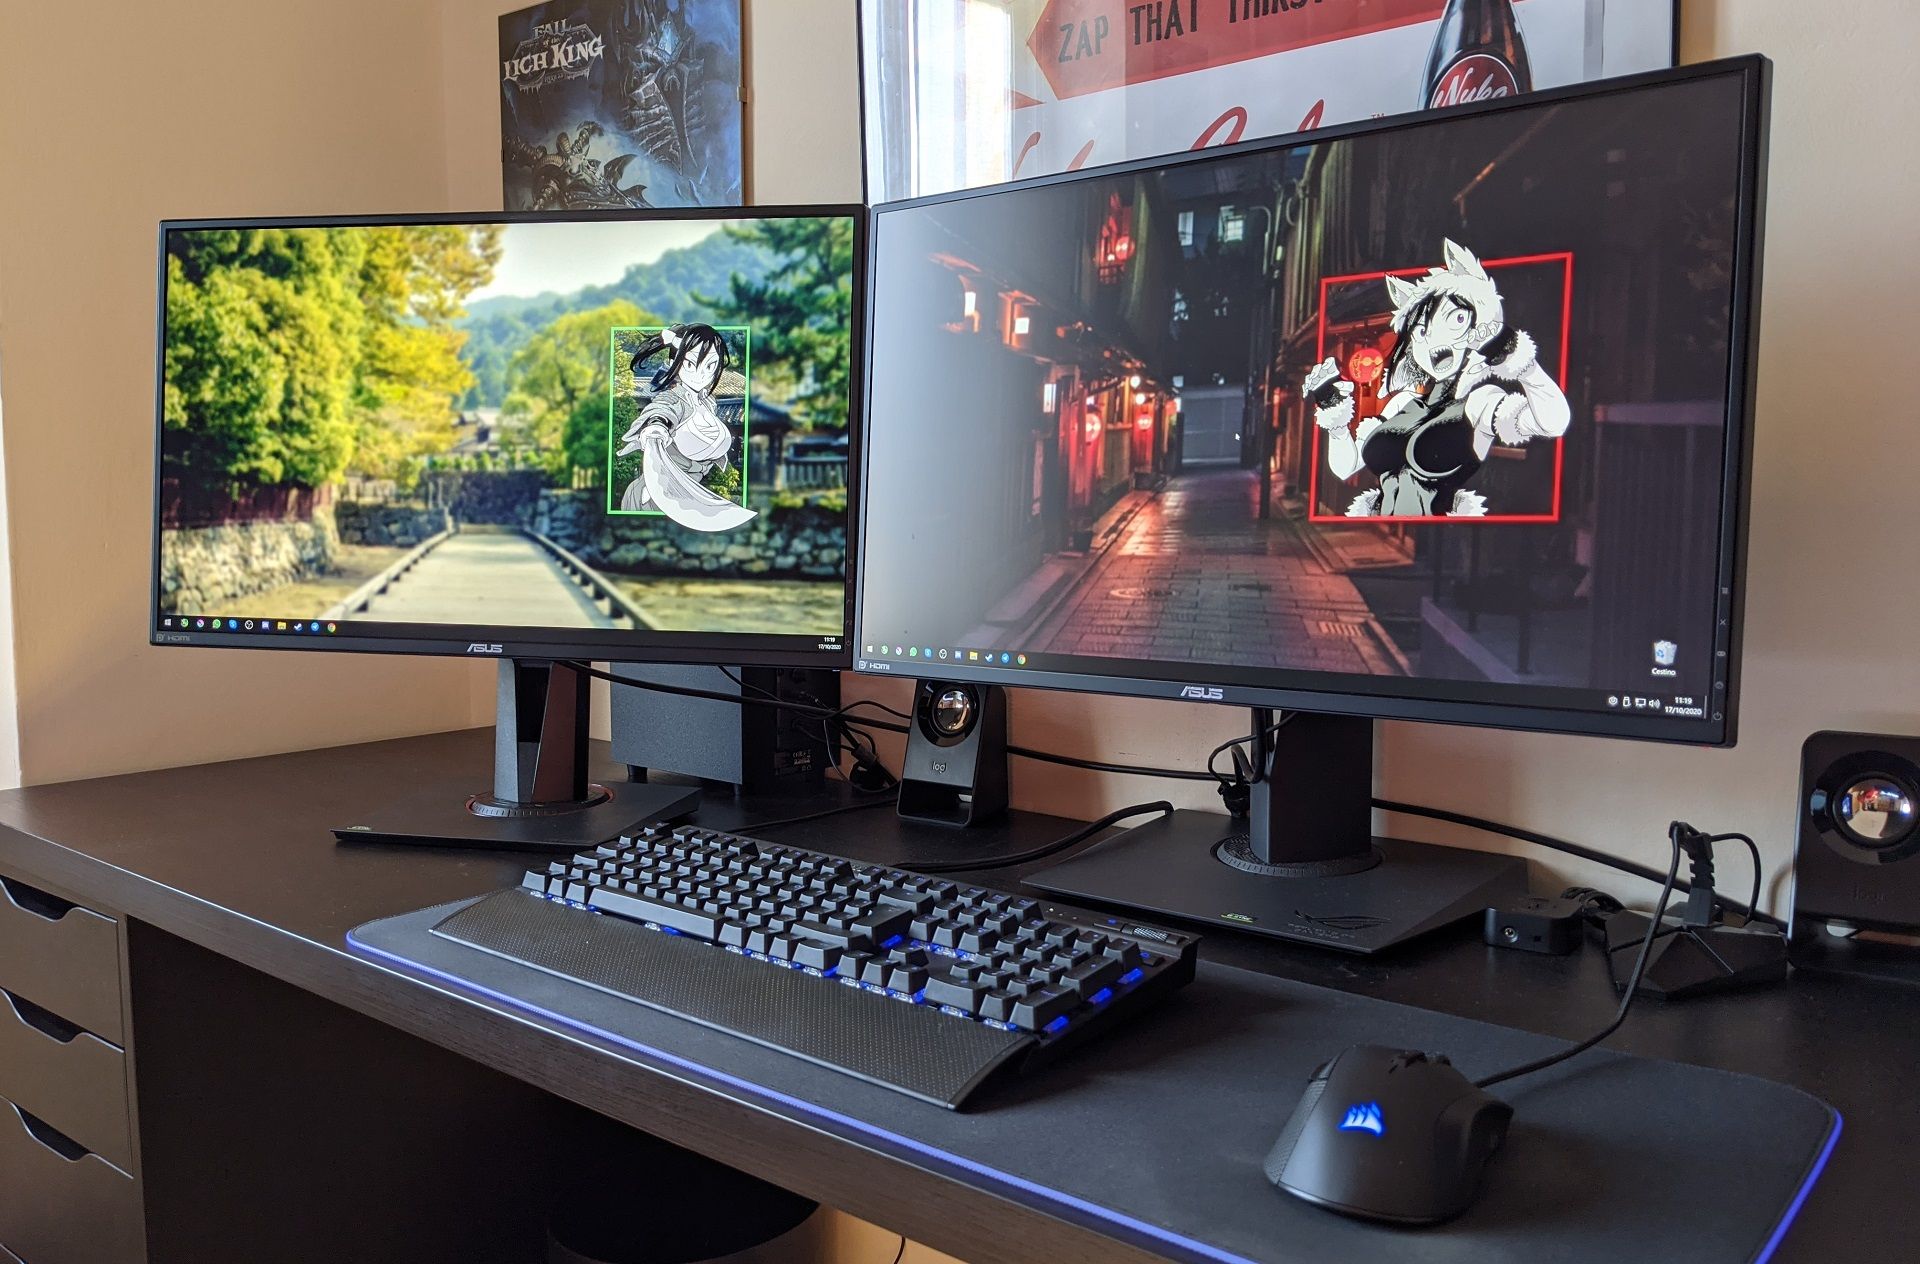 ASUS TUF Gaming VG279QM - Recensione del monitor high refresh rate